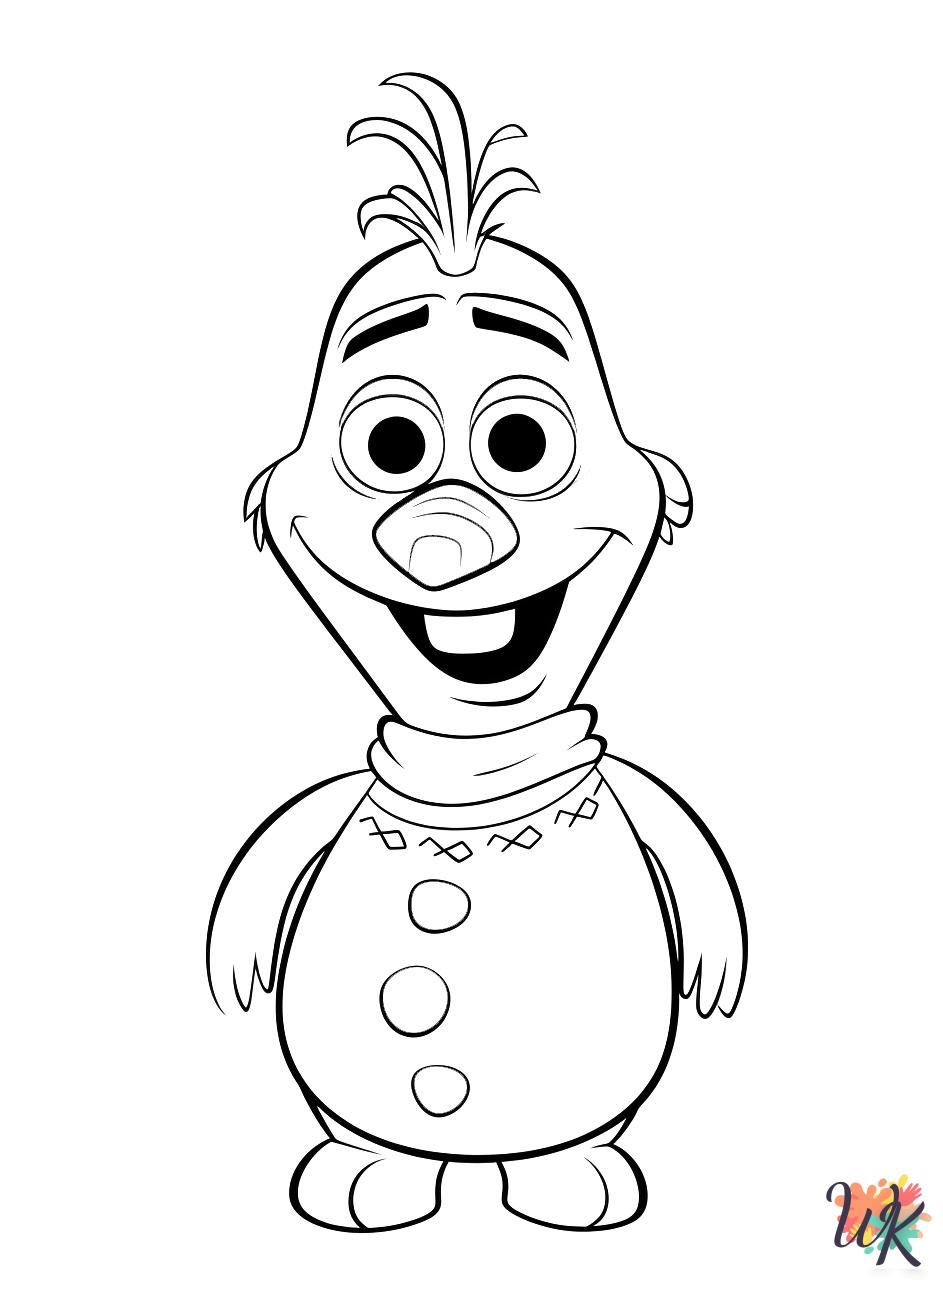 Olaf coloring pages free